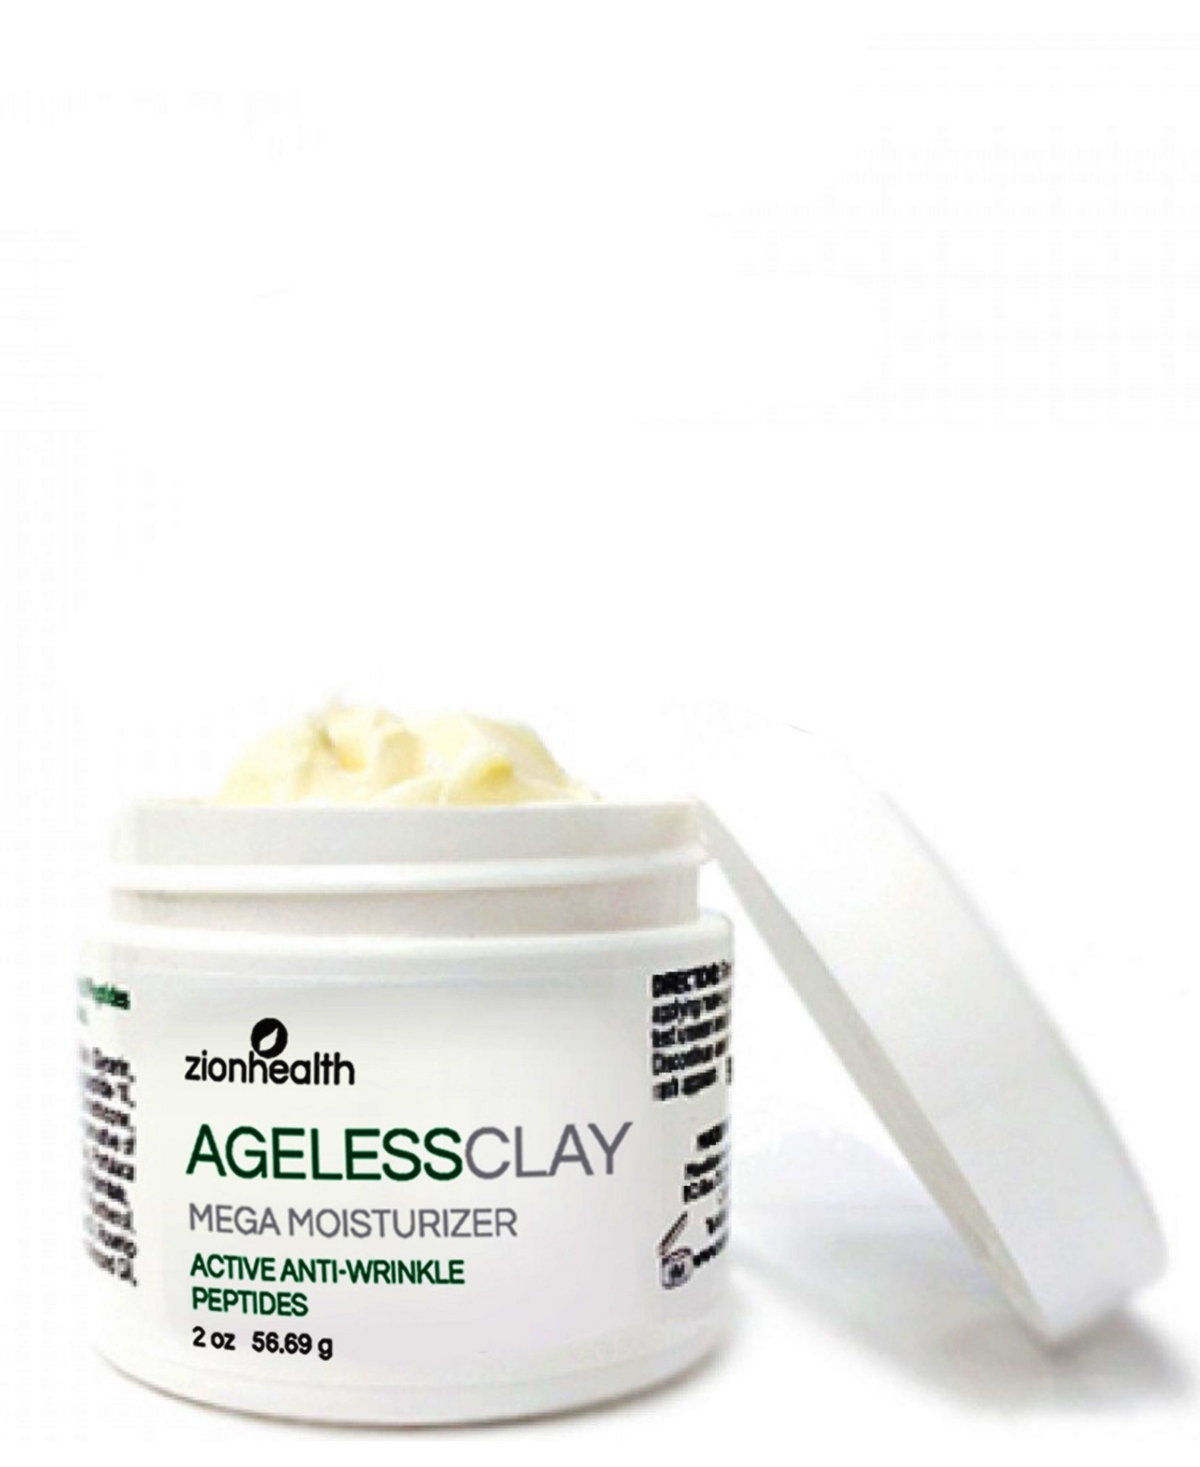 Ageless Clay Anti-Wrinkle Cream with Active Peptides - No COLOR